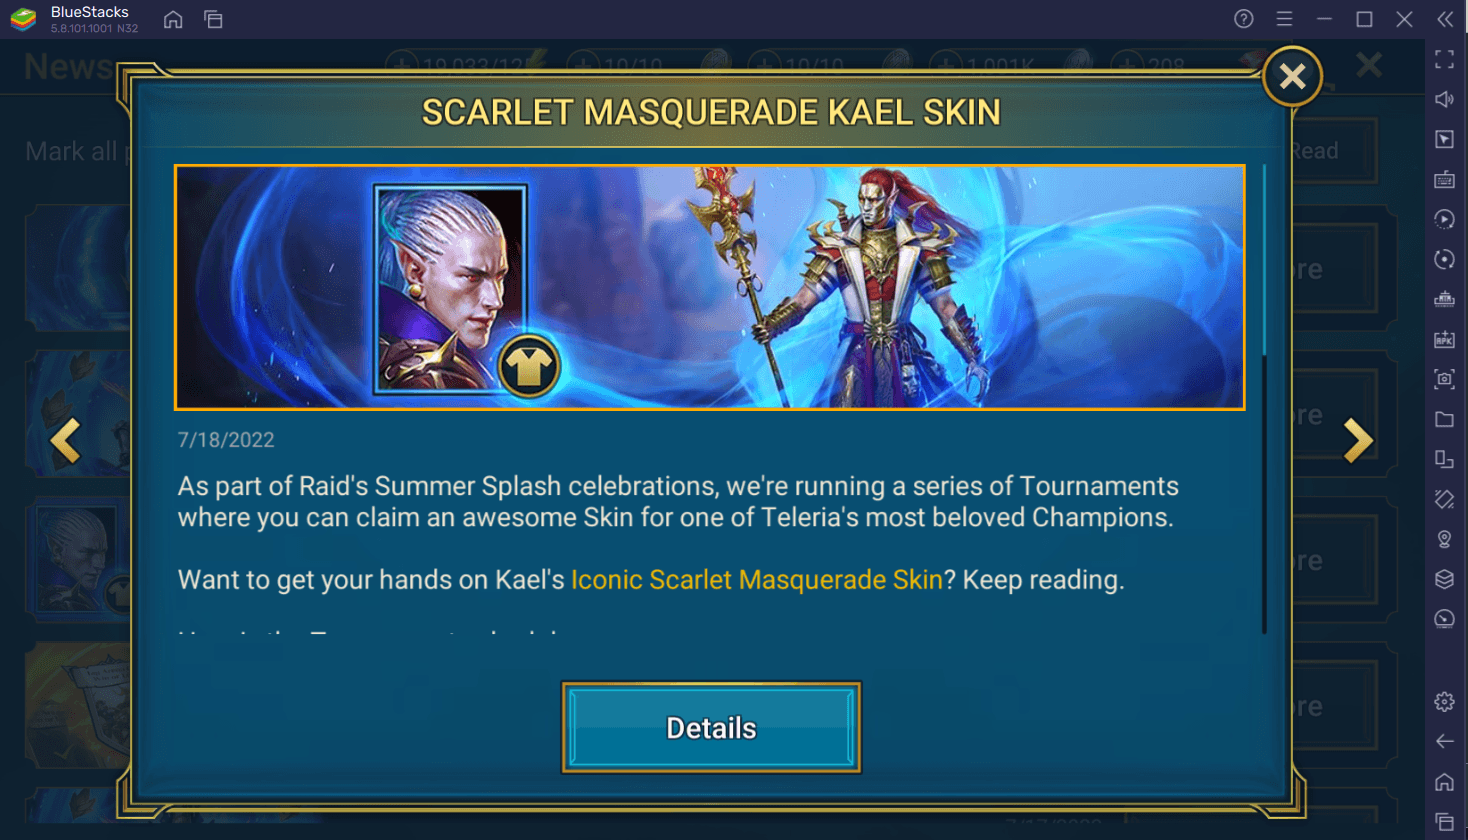 RAID: Shadow Legends Adds New Tournaments for Scarlet Masquerade Kael Skin